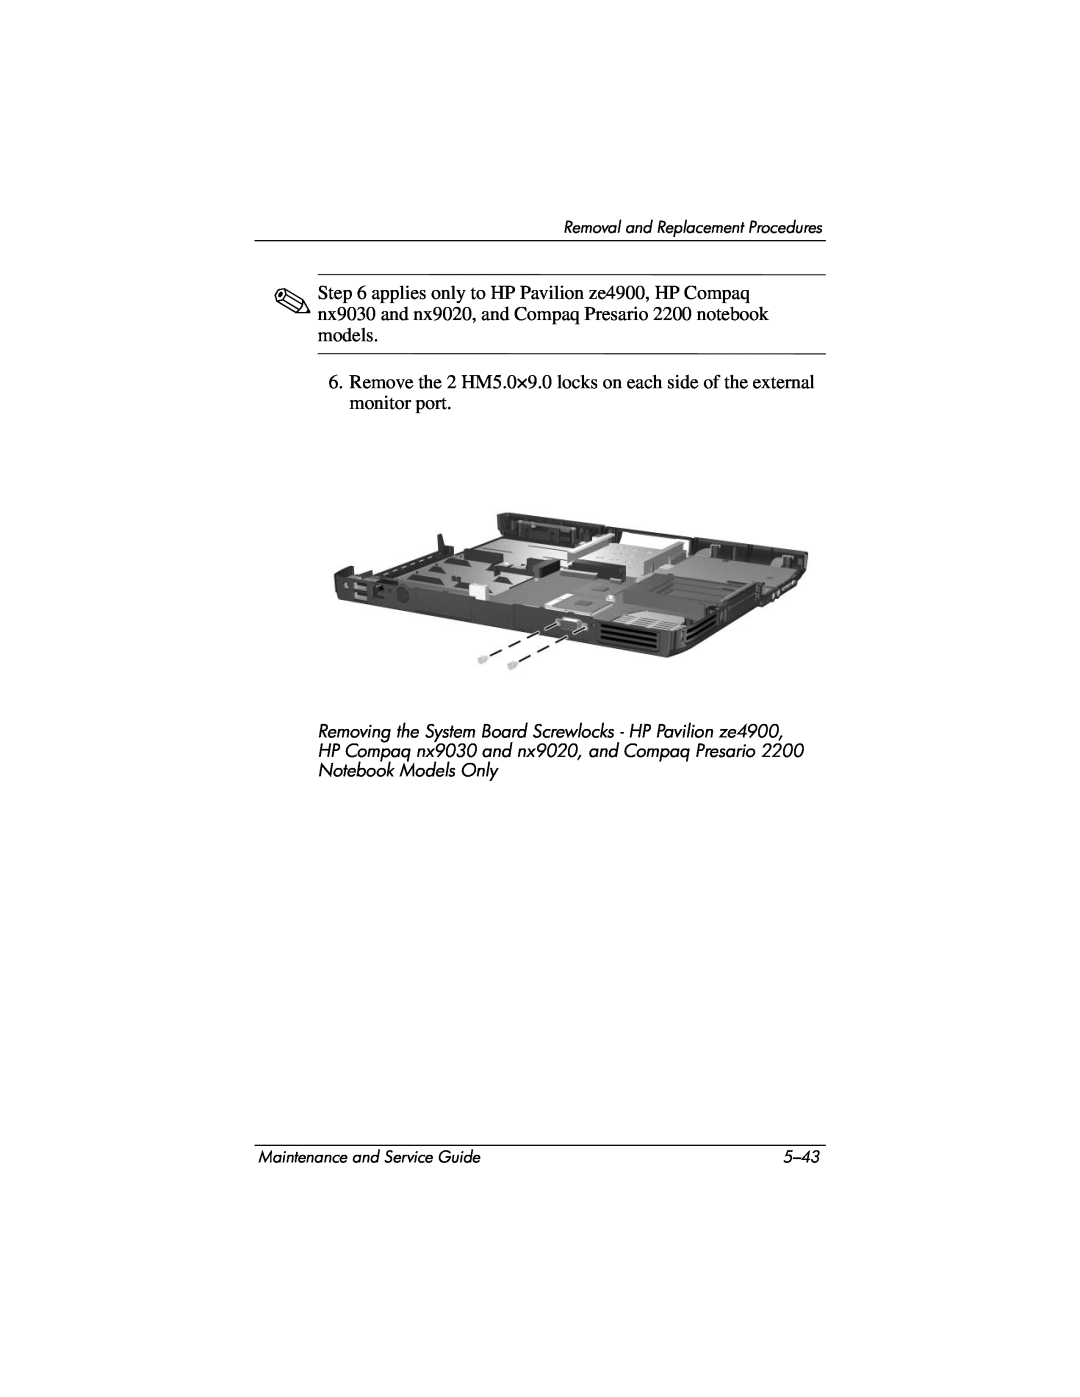 HP NX9020 manual applies only to HP Pavilion ze4900, HP Compaq nx9030 and nx9020, and Compaq Presario 2200 notebook models 